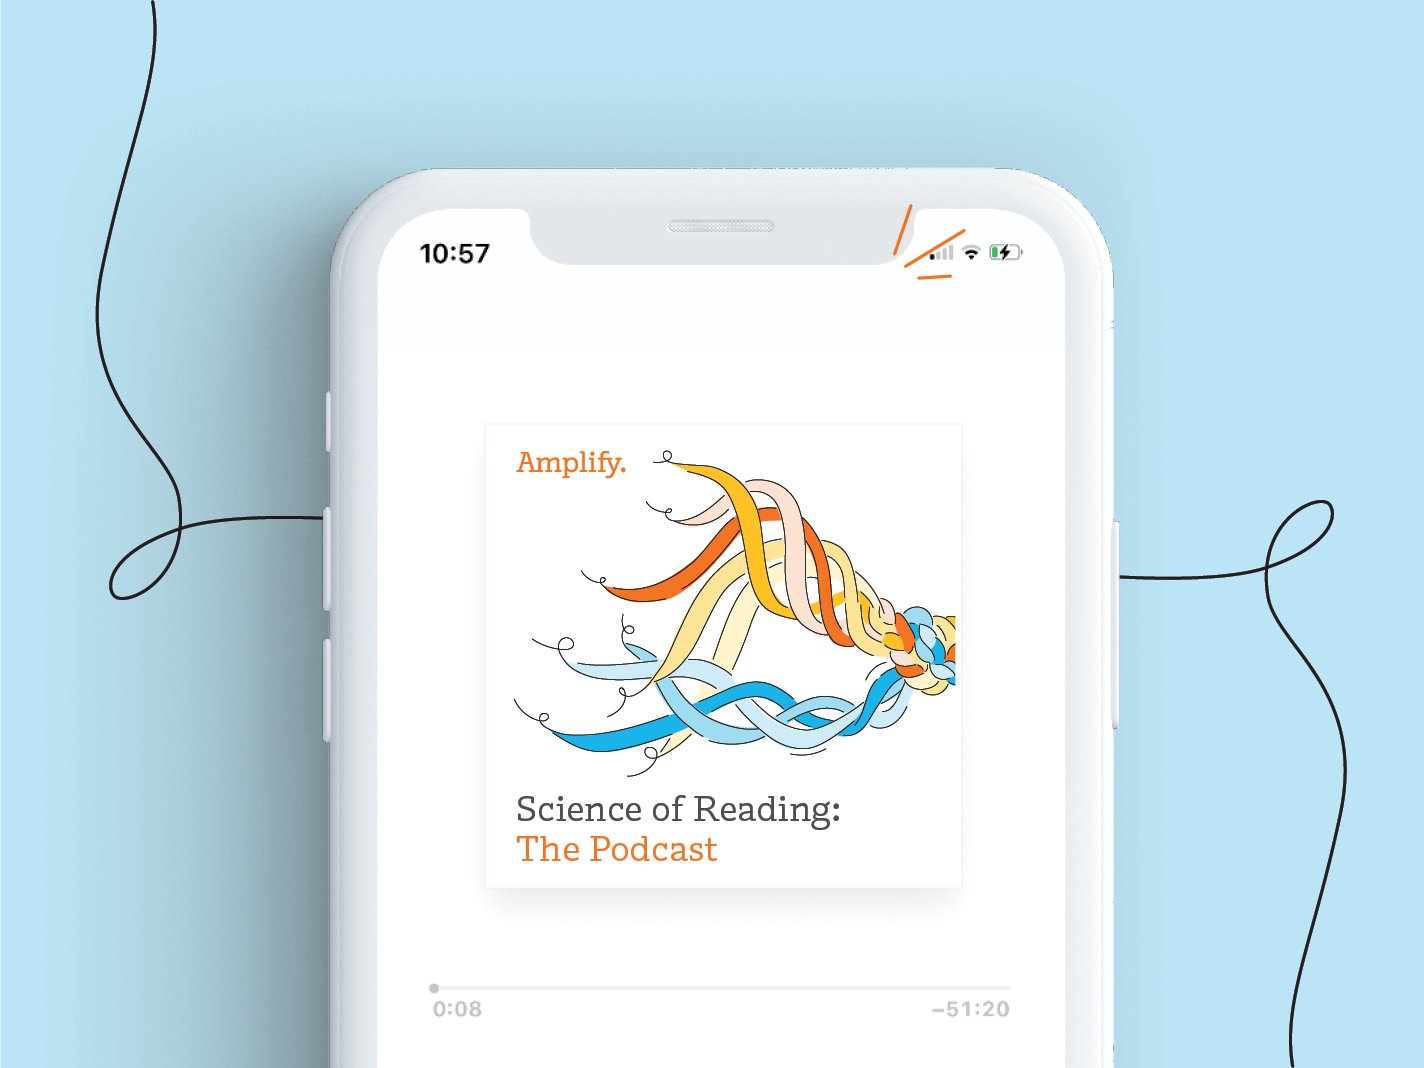 Smartphone displaying the Science of Reading podcast app screen with a colorful graphic of intertwined sound waves and text overlays.